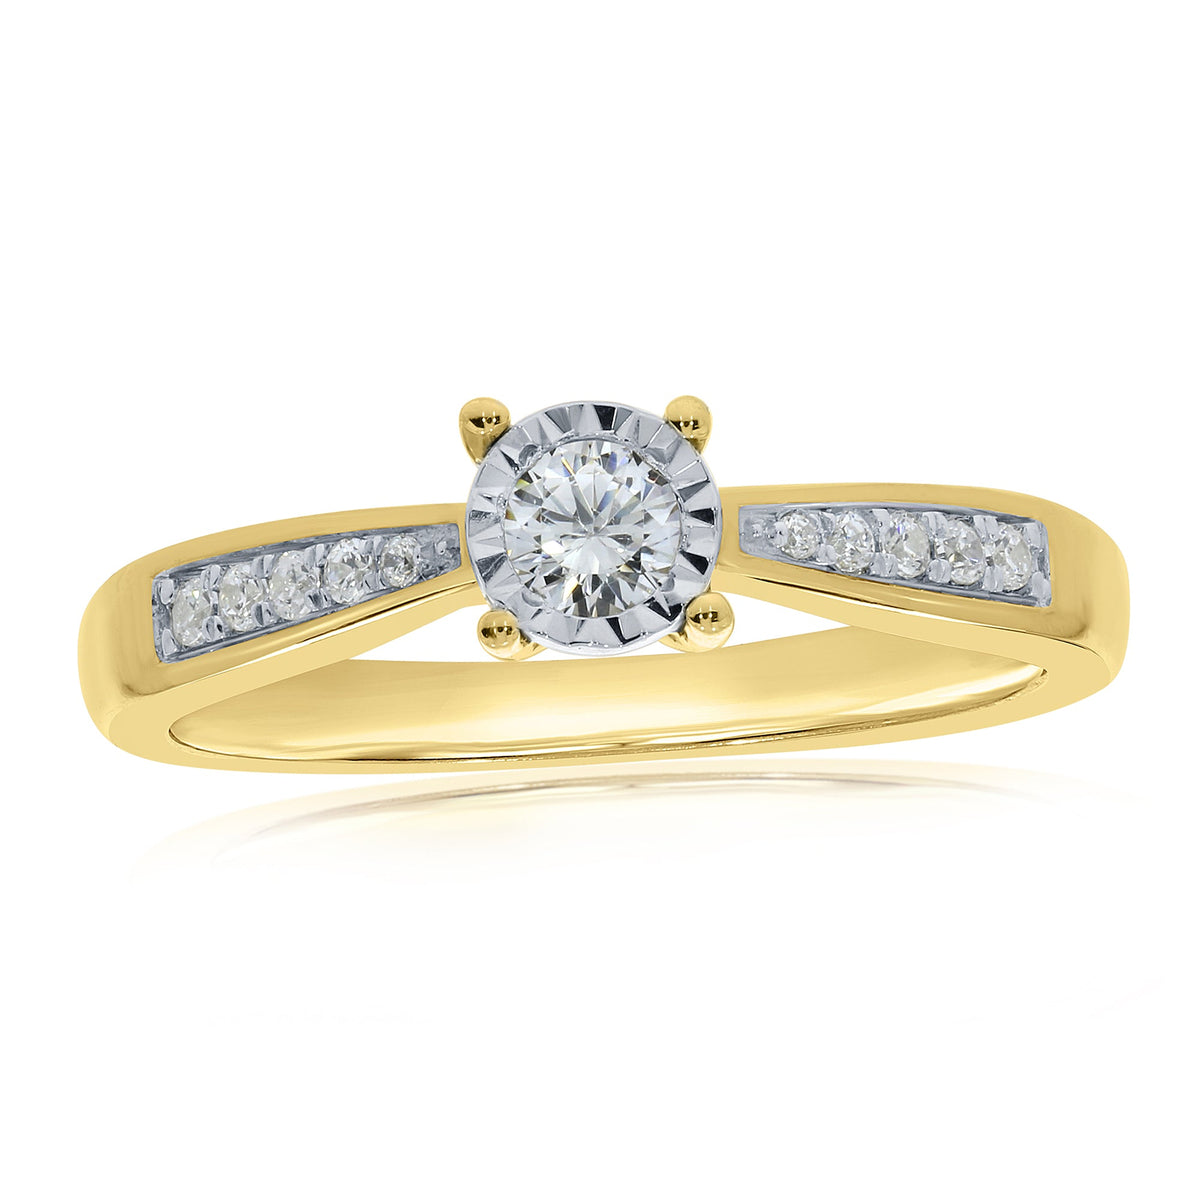 9ct gold single stone miracle plate diamond ring with diamond set shoulders 0.26ct